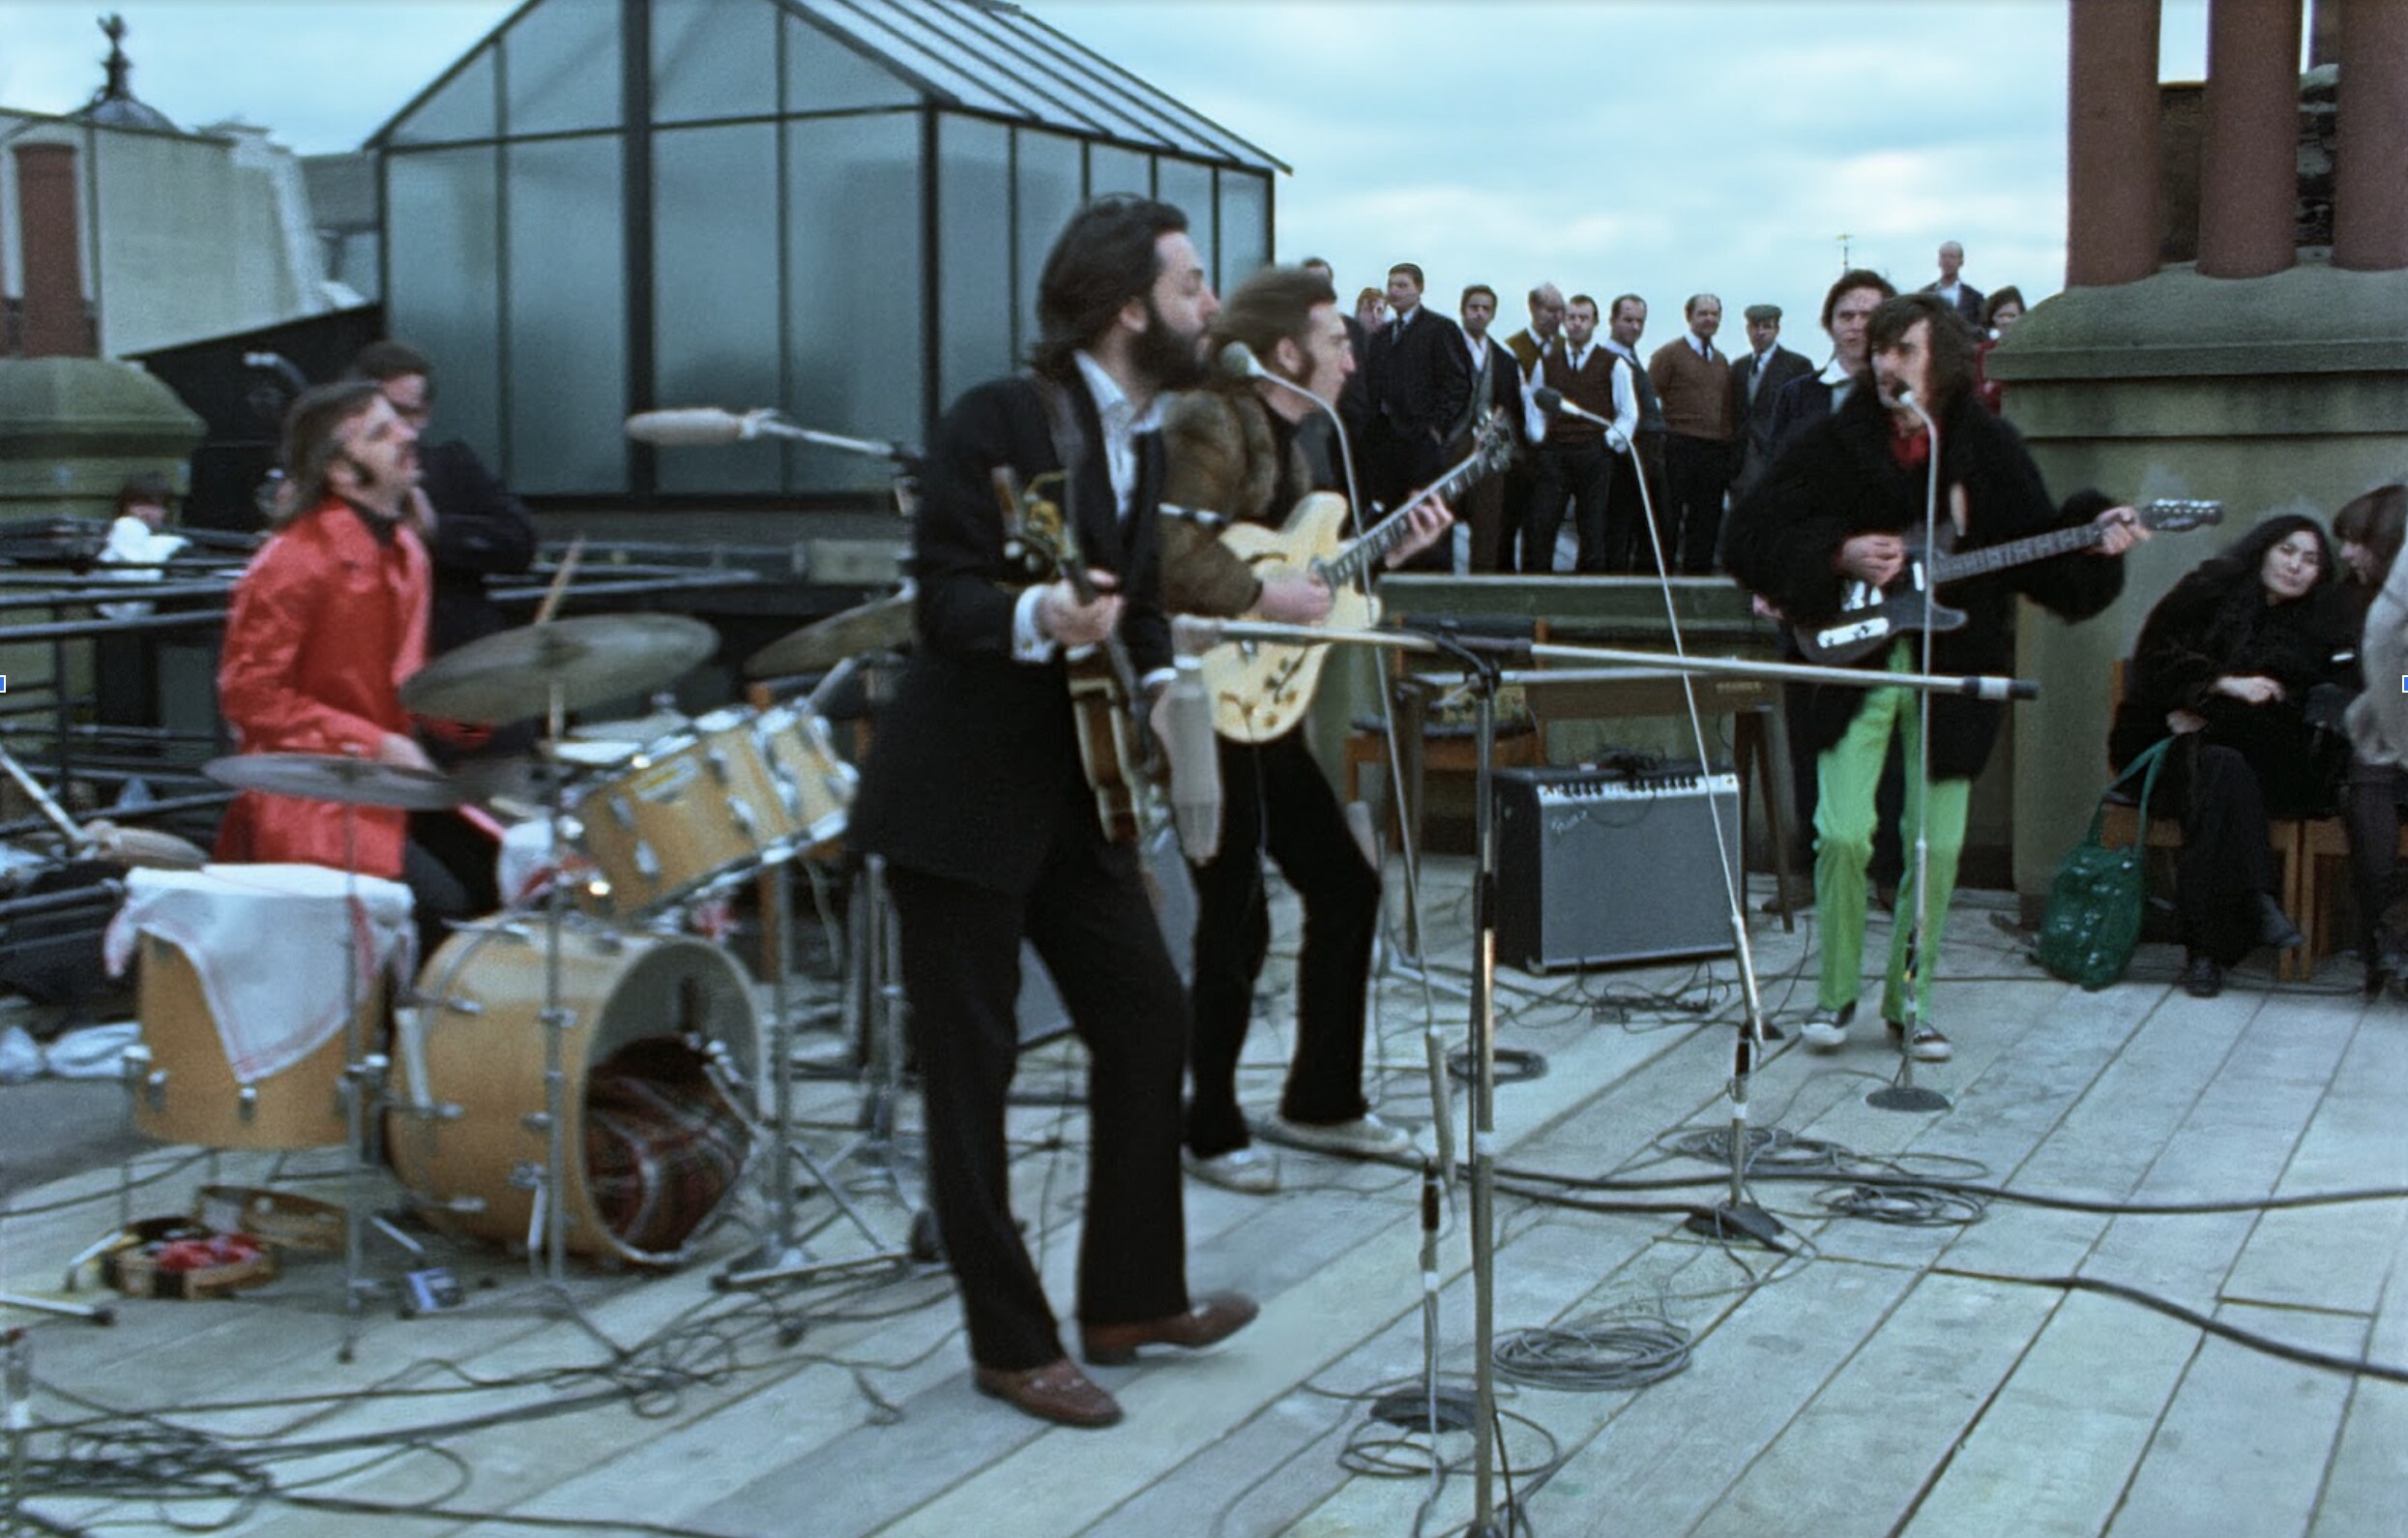 The Beatles perform on a rooftop in front of a small audience